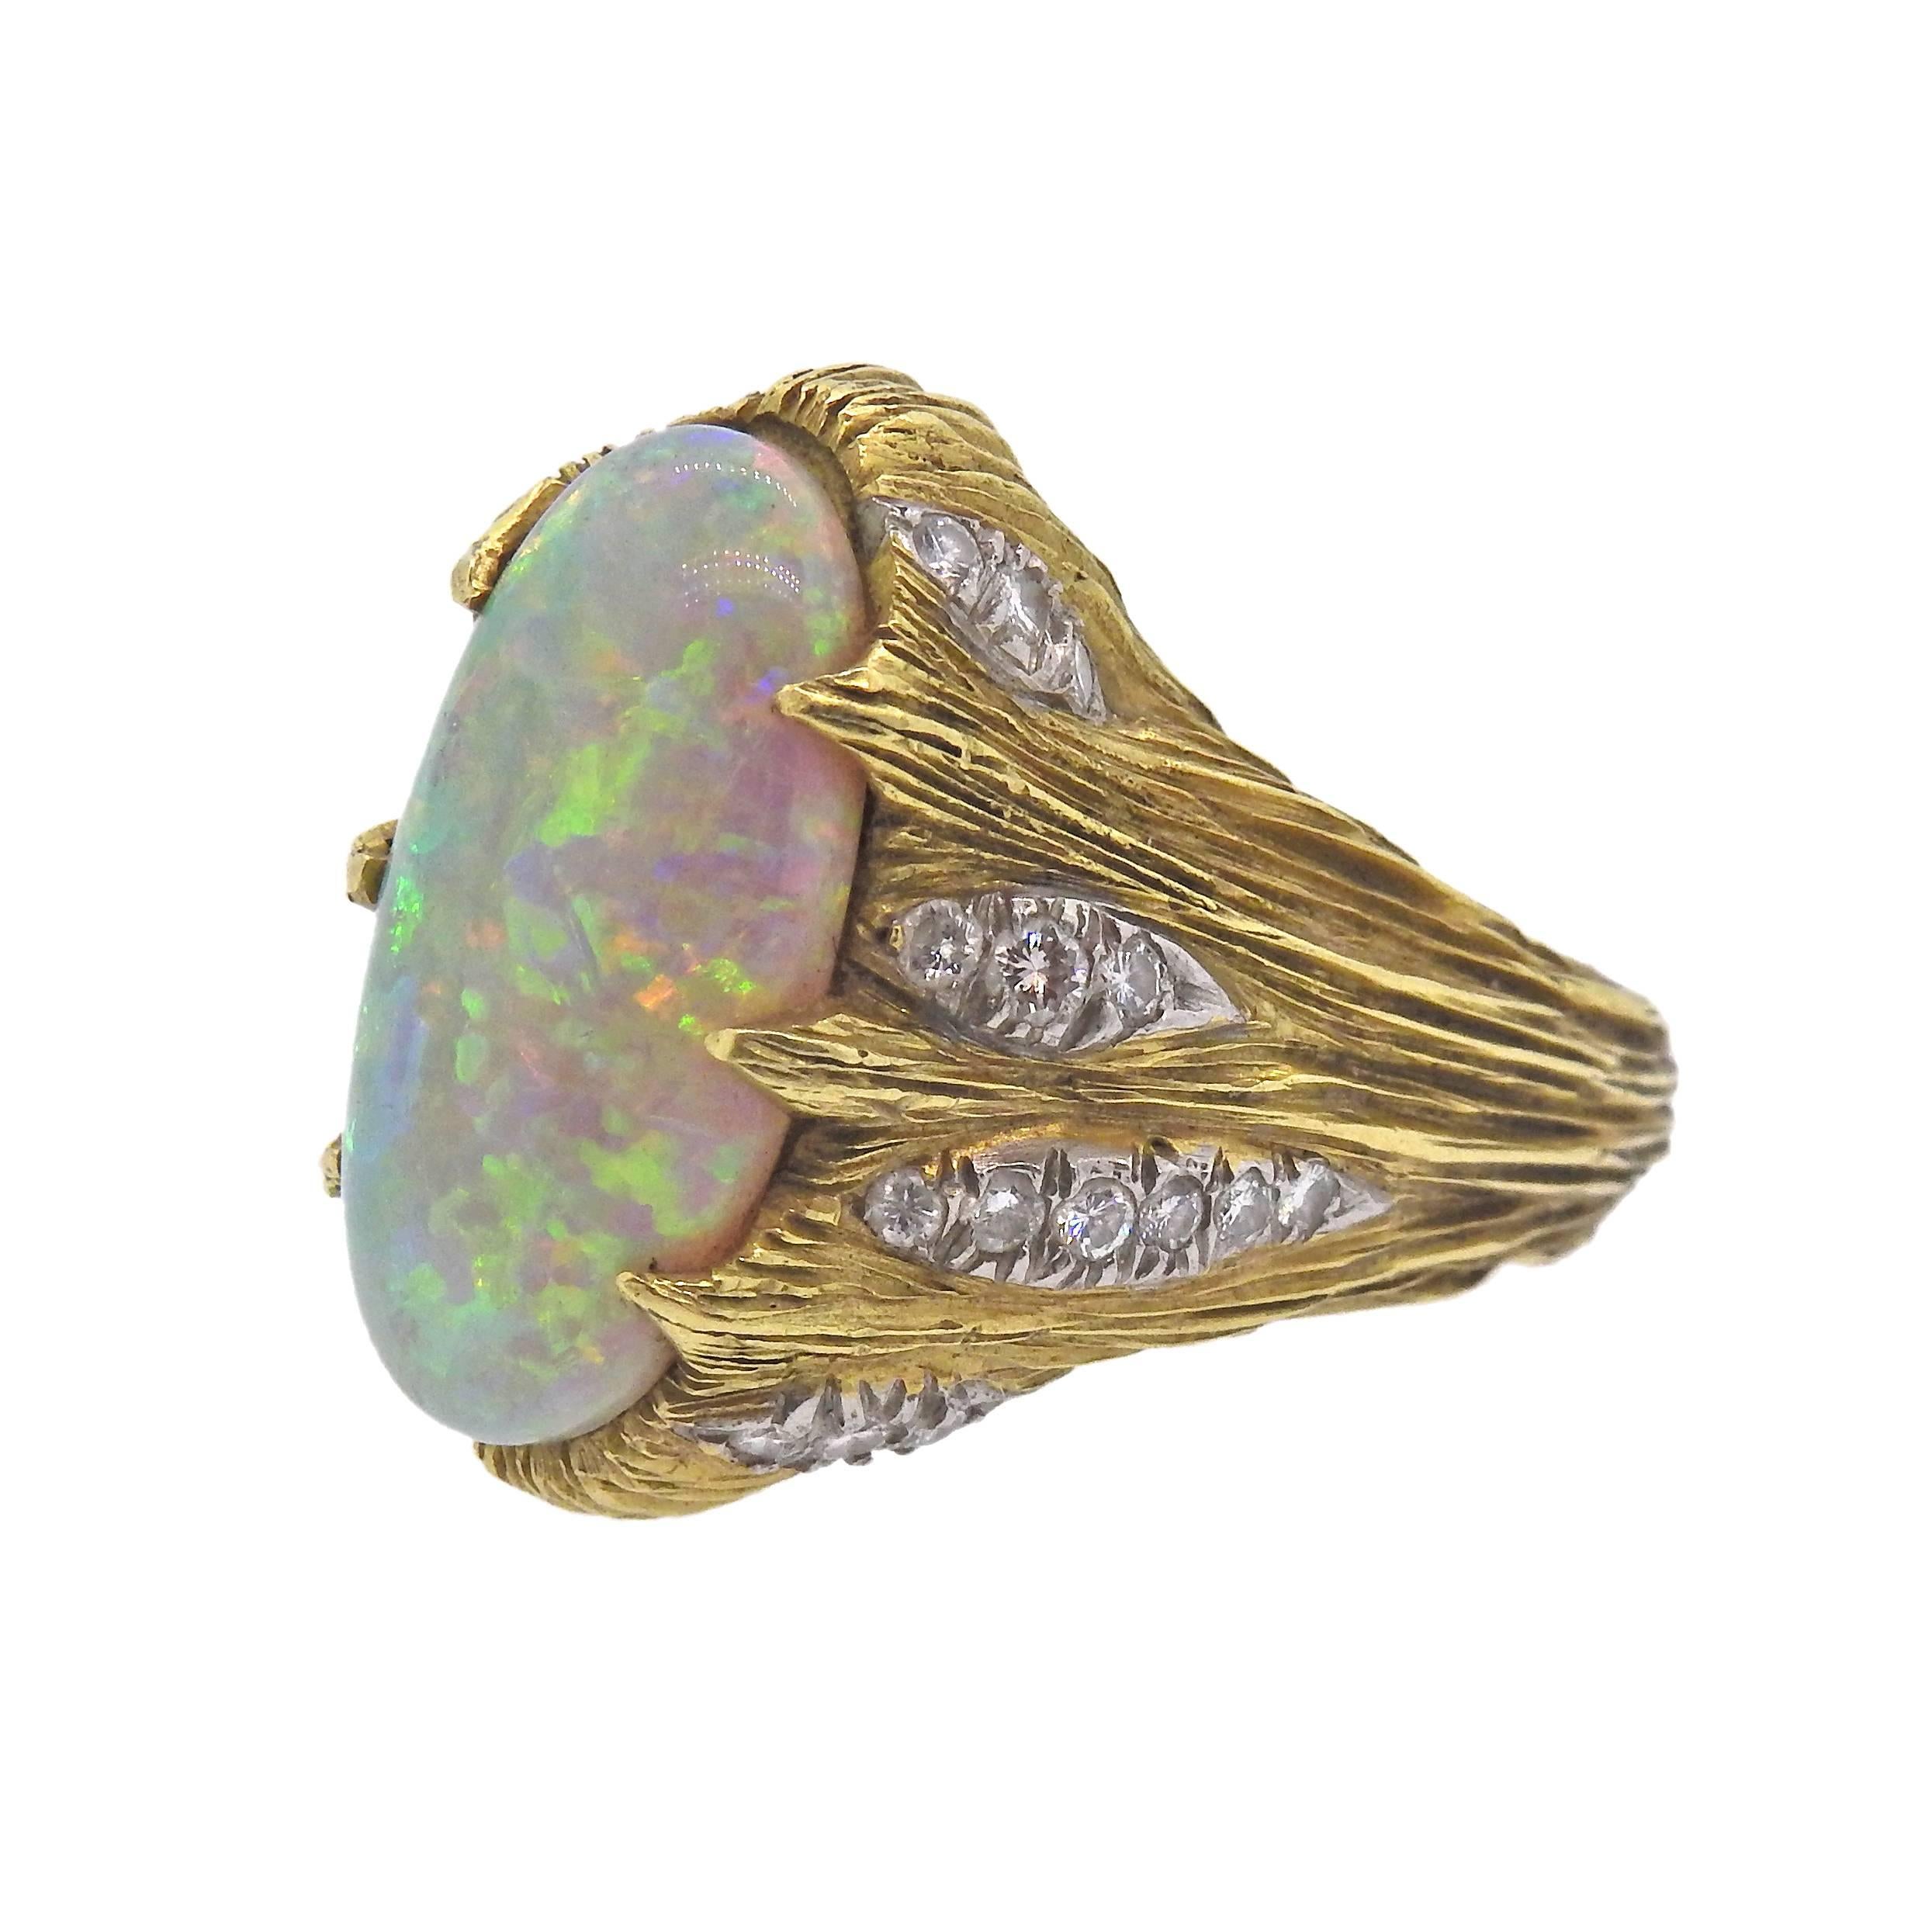 Vintage 1970s 18k gold ring, set with a 19.8mm x 9.6mm opal gemstone, accended with approx. 0.20ctw in diamonds. Ring size - 6 3/4, ring top is 22mm wide , weighs 17.8 grams. 